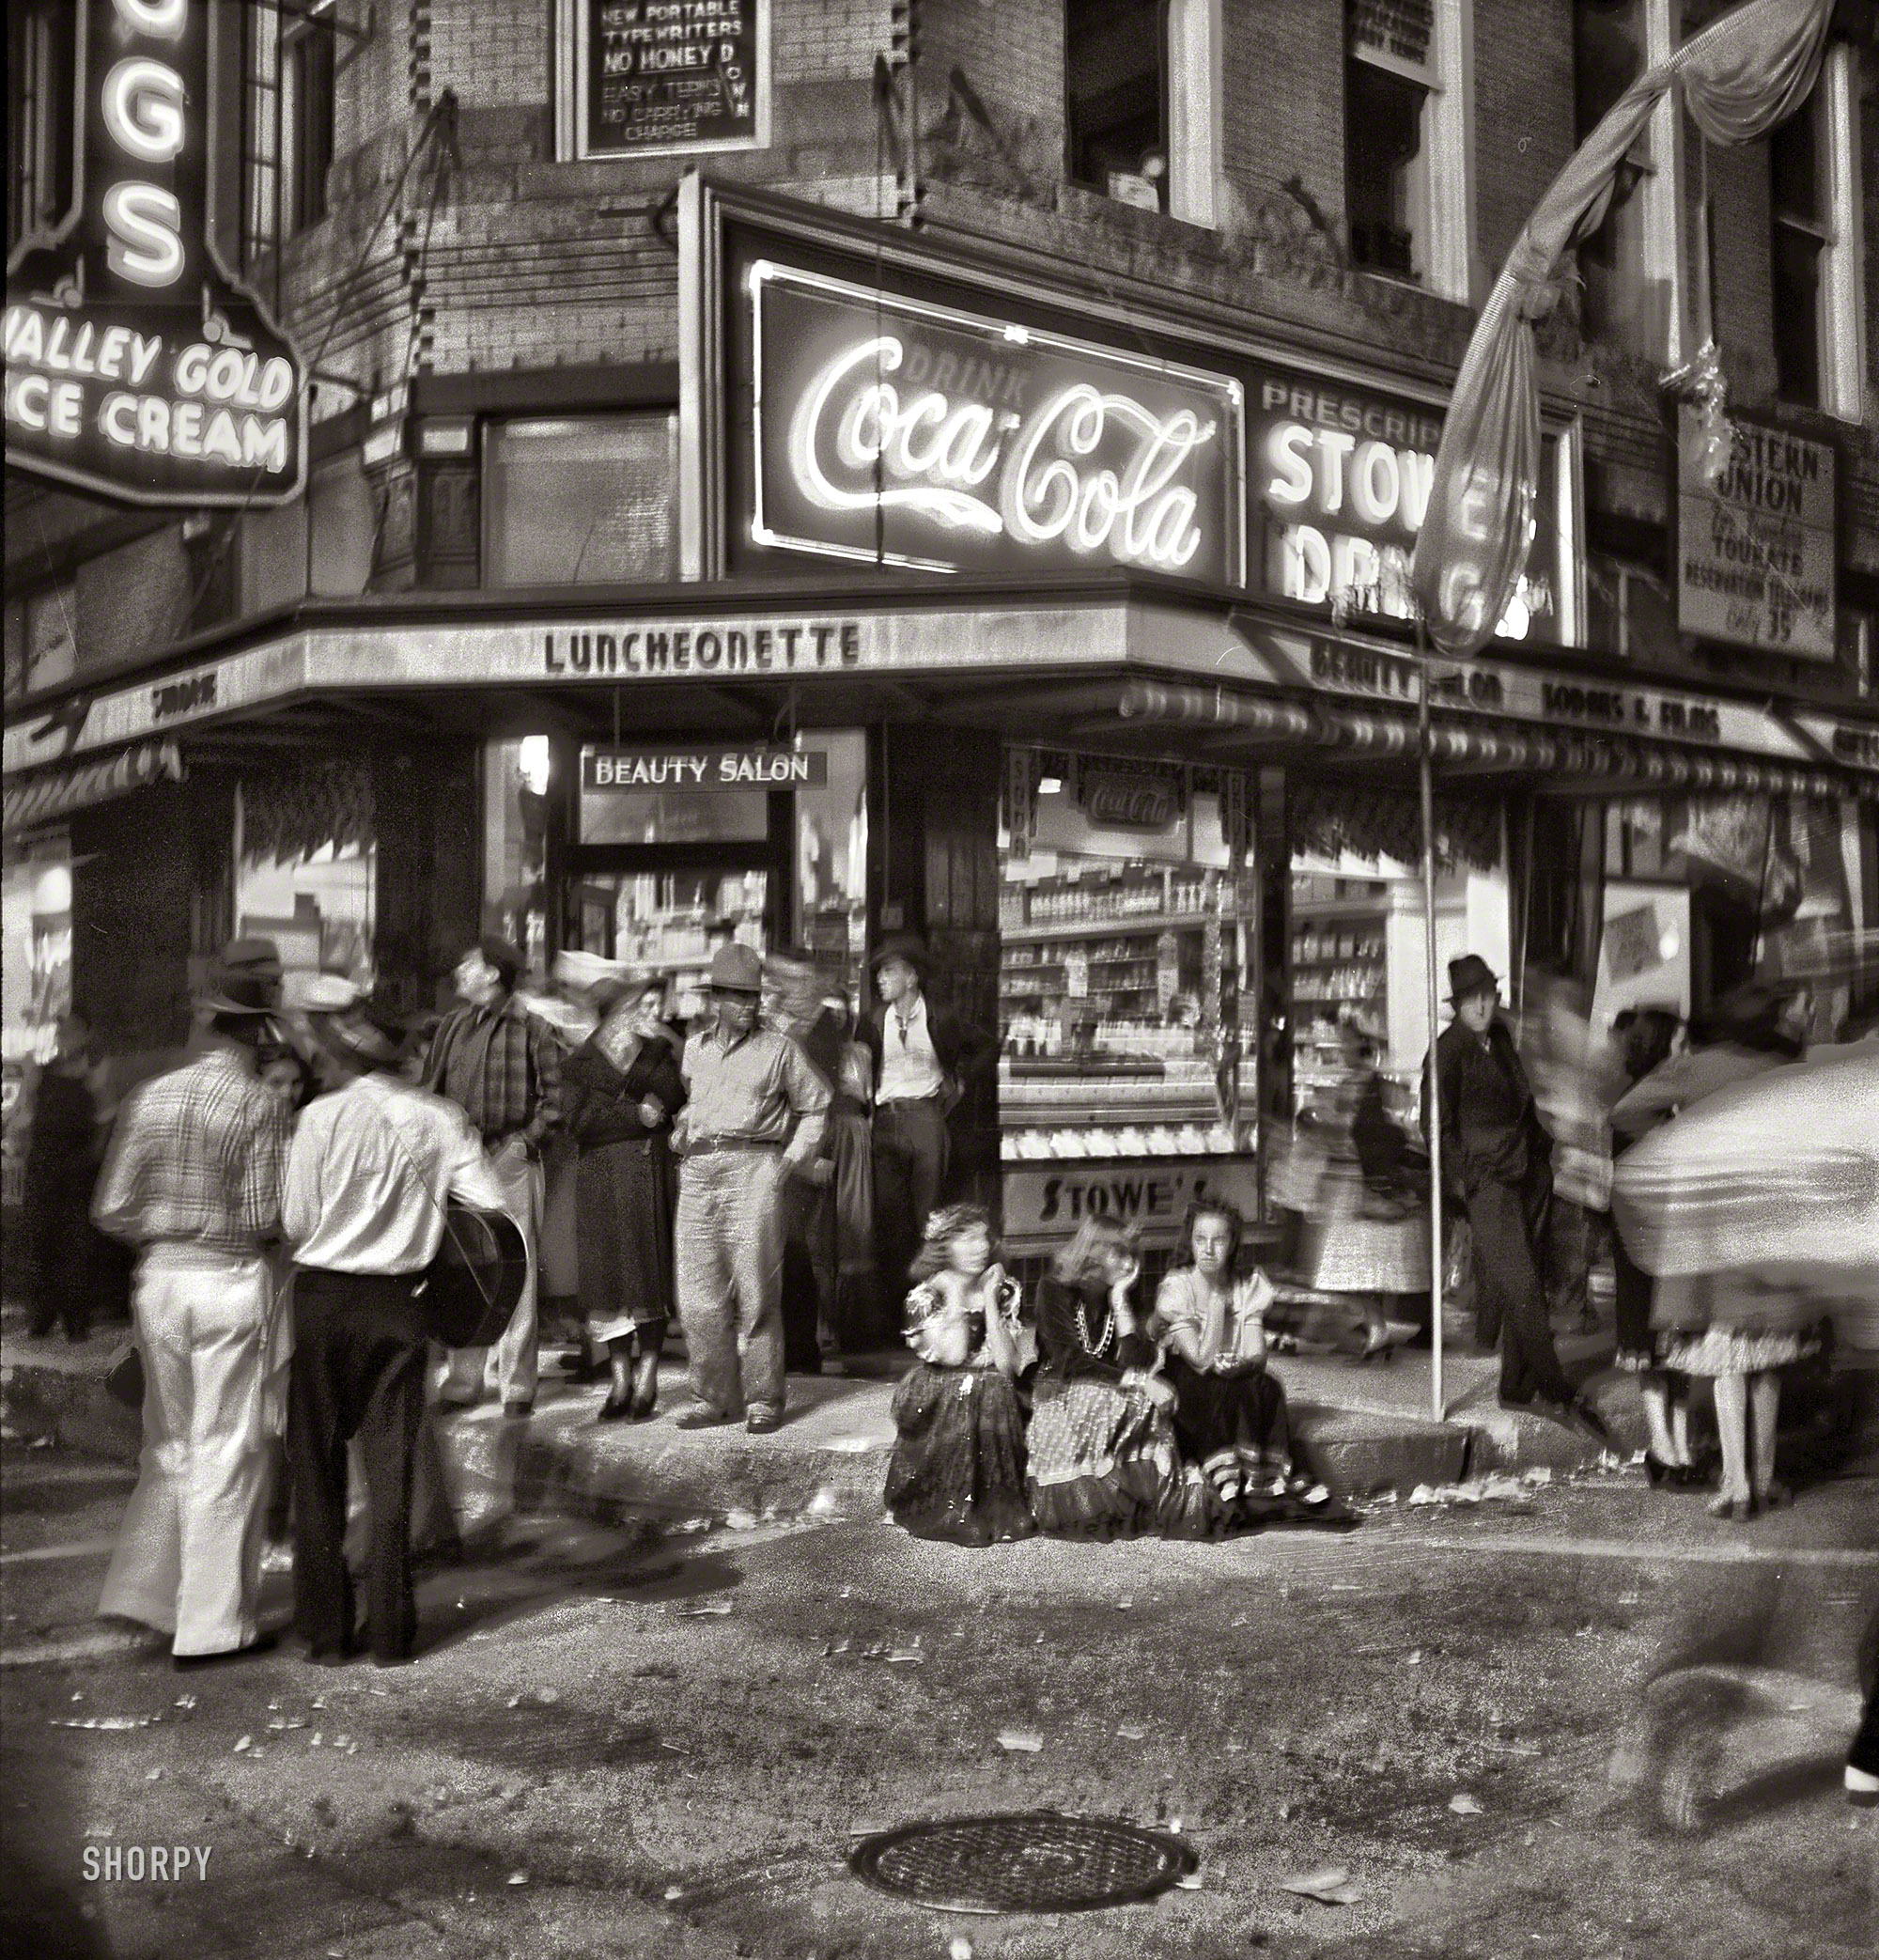 July 1940. "Street scene at the fiesta in Santa Fe, New Mexico." Photo by Russell Lee for the Farm Security Administration. View full size.